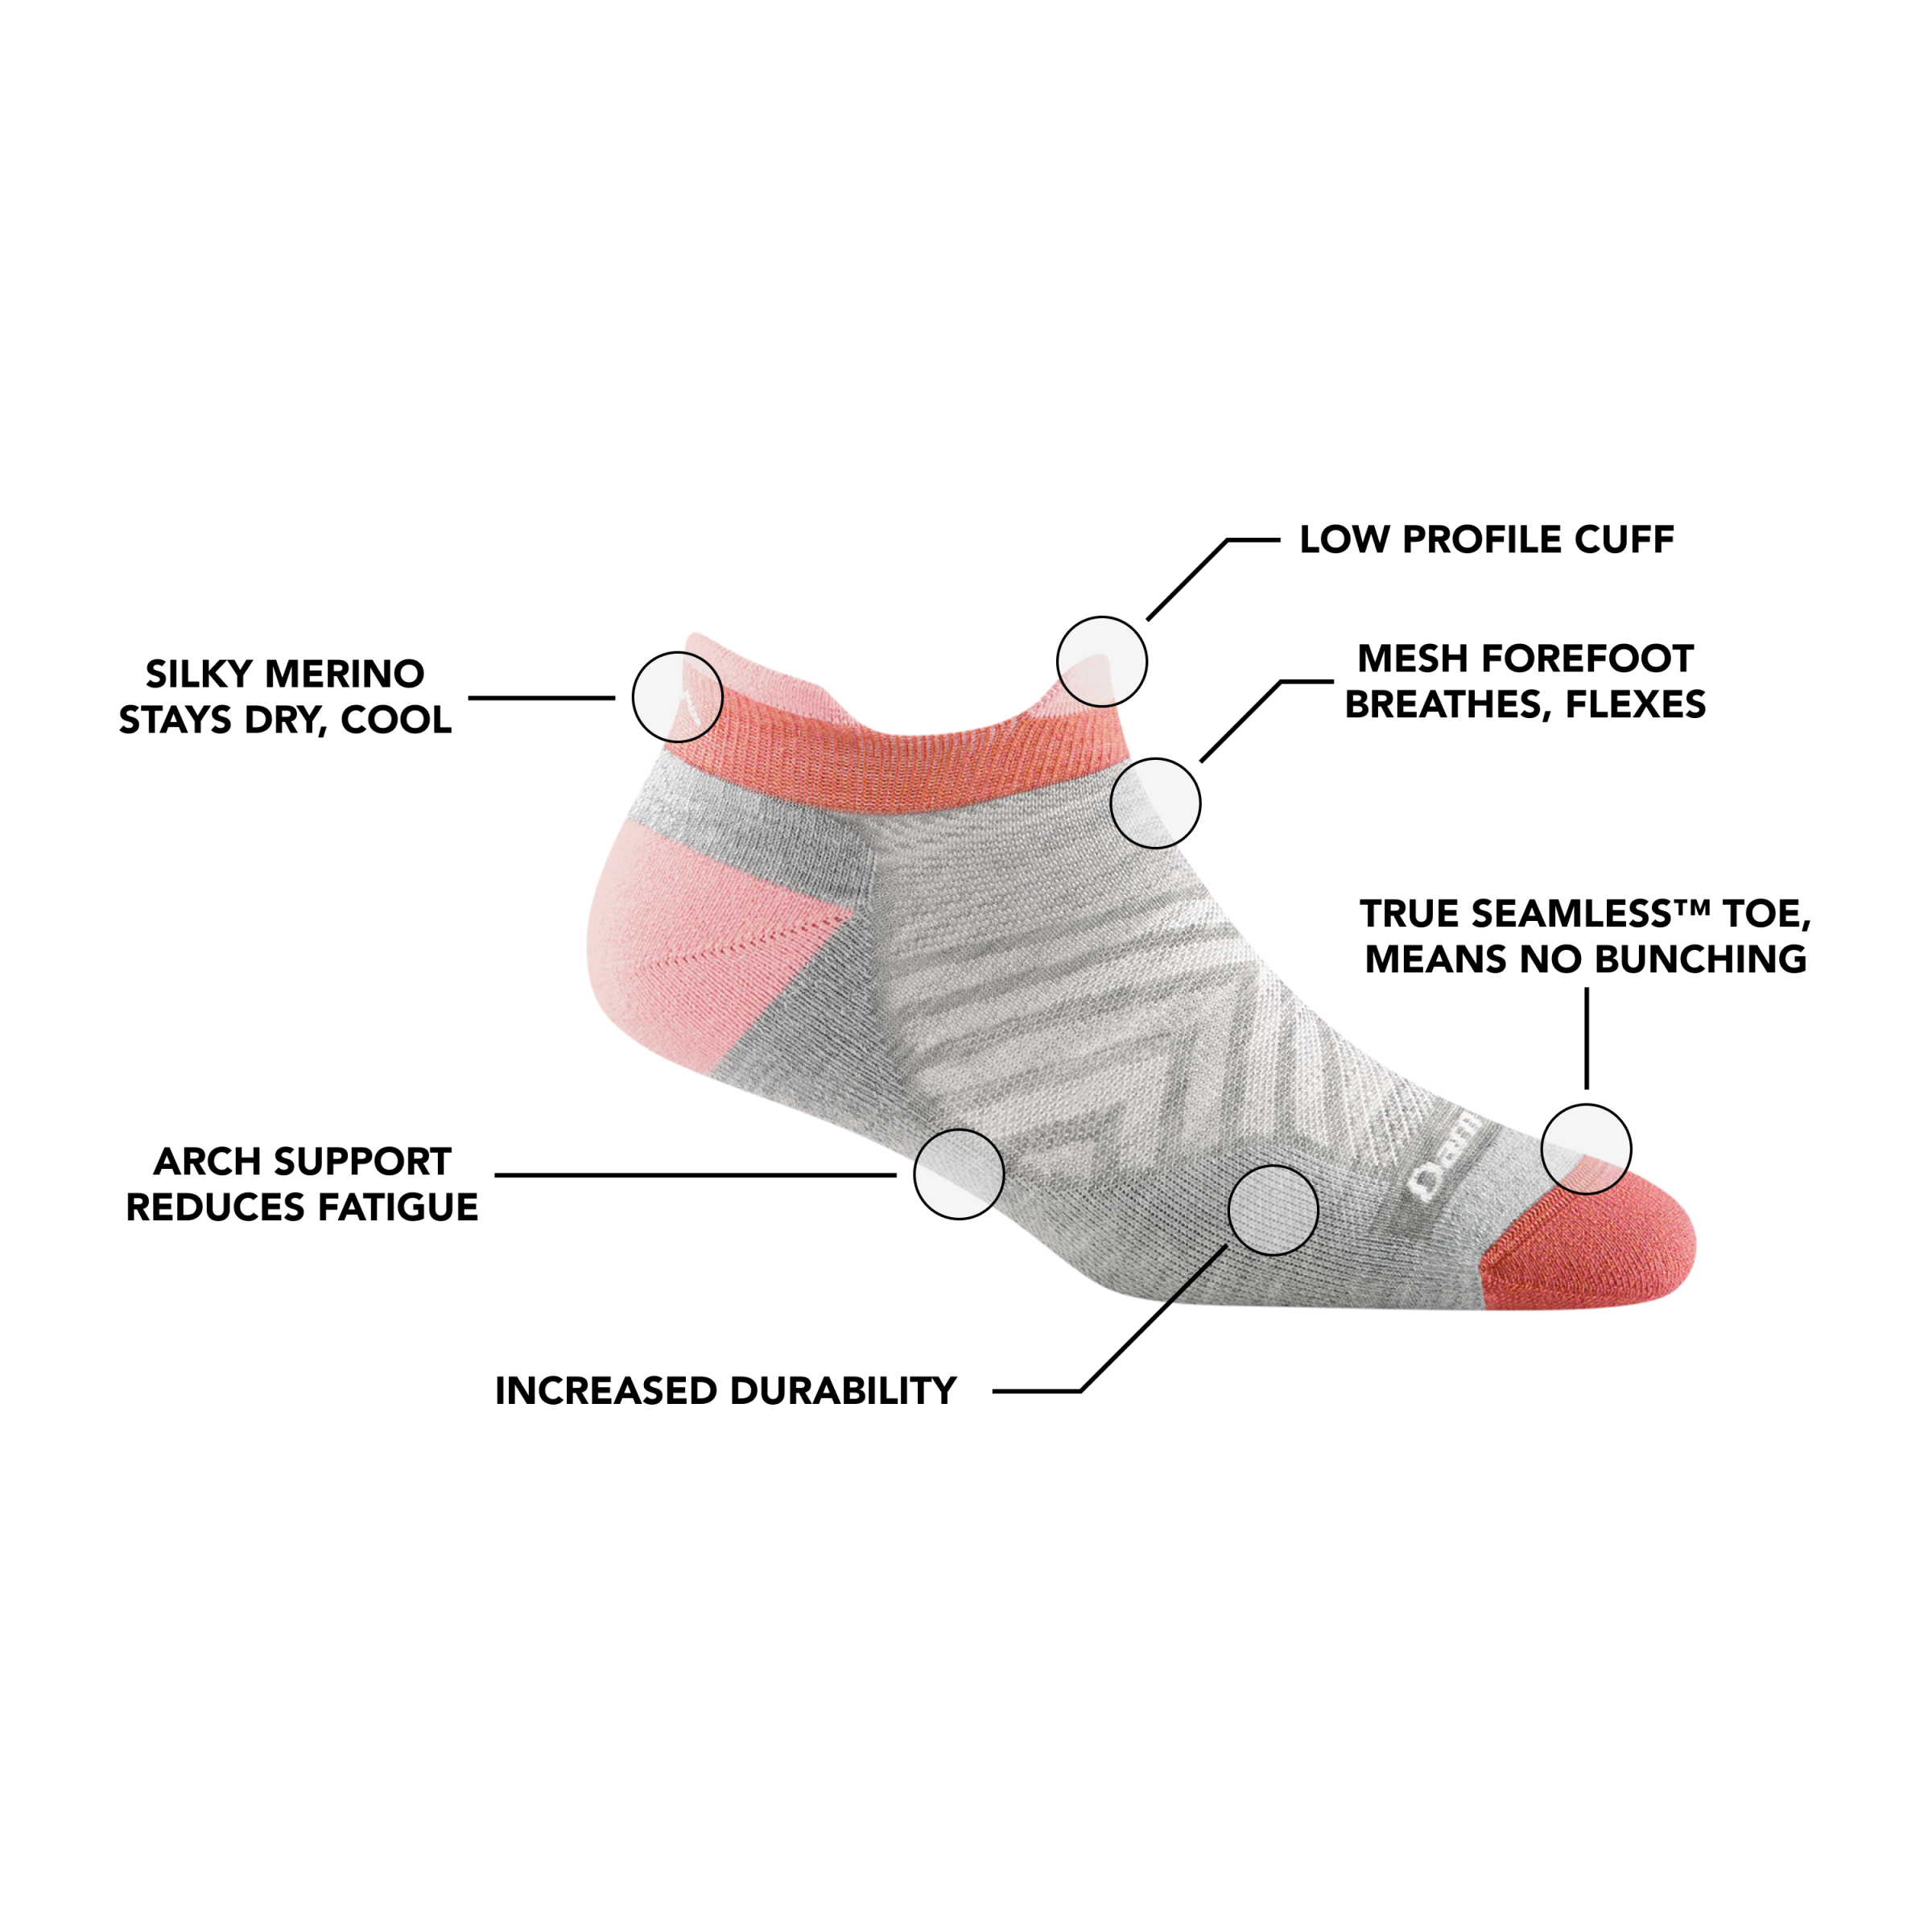 Image of Women's Run No Show Tab Ultralightweight Running Sock in Ash calling out all of the features